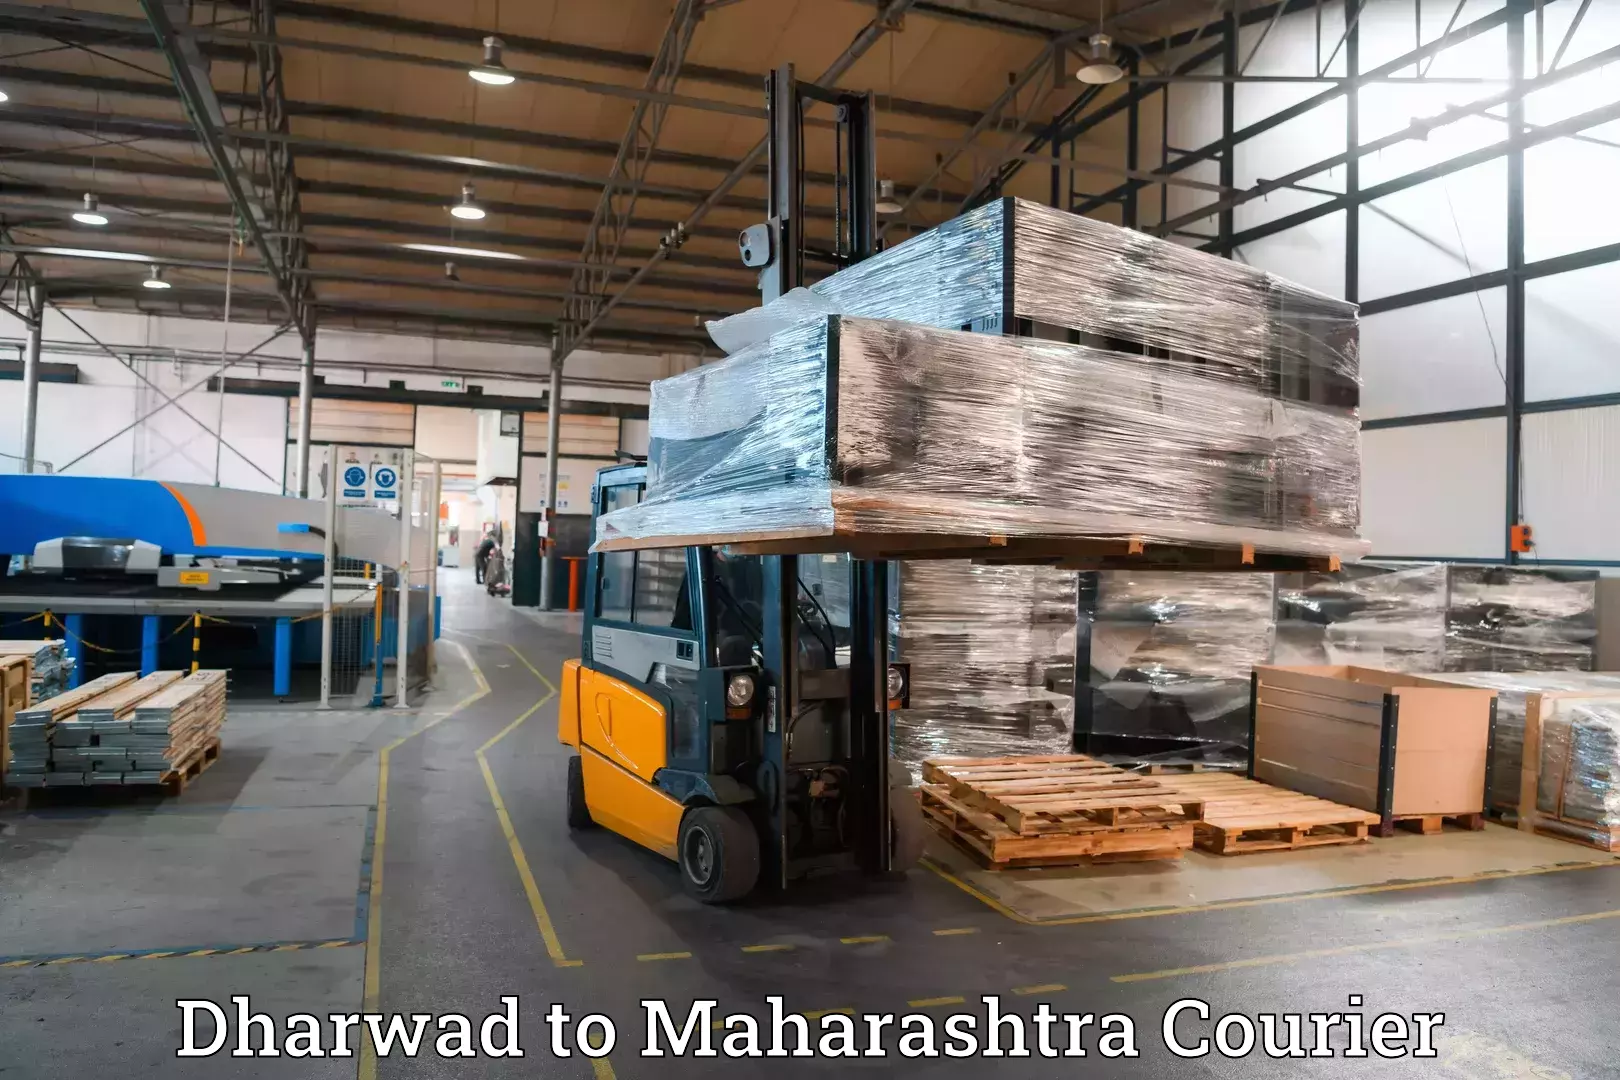 Luggage shipment specialists Dharwad to Solapur